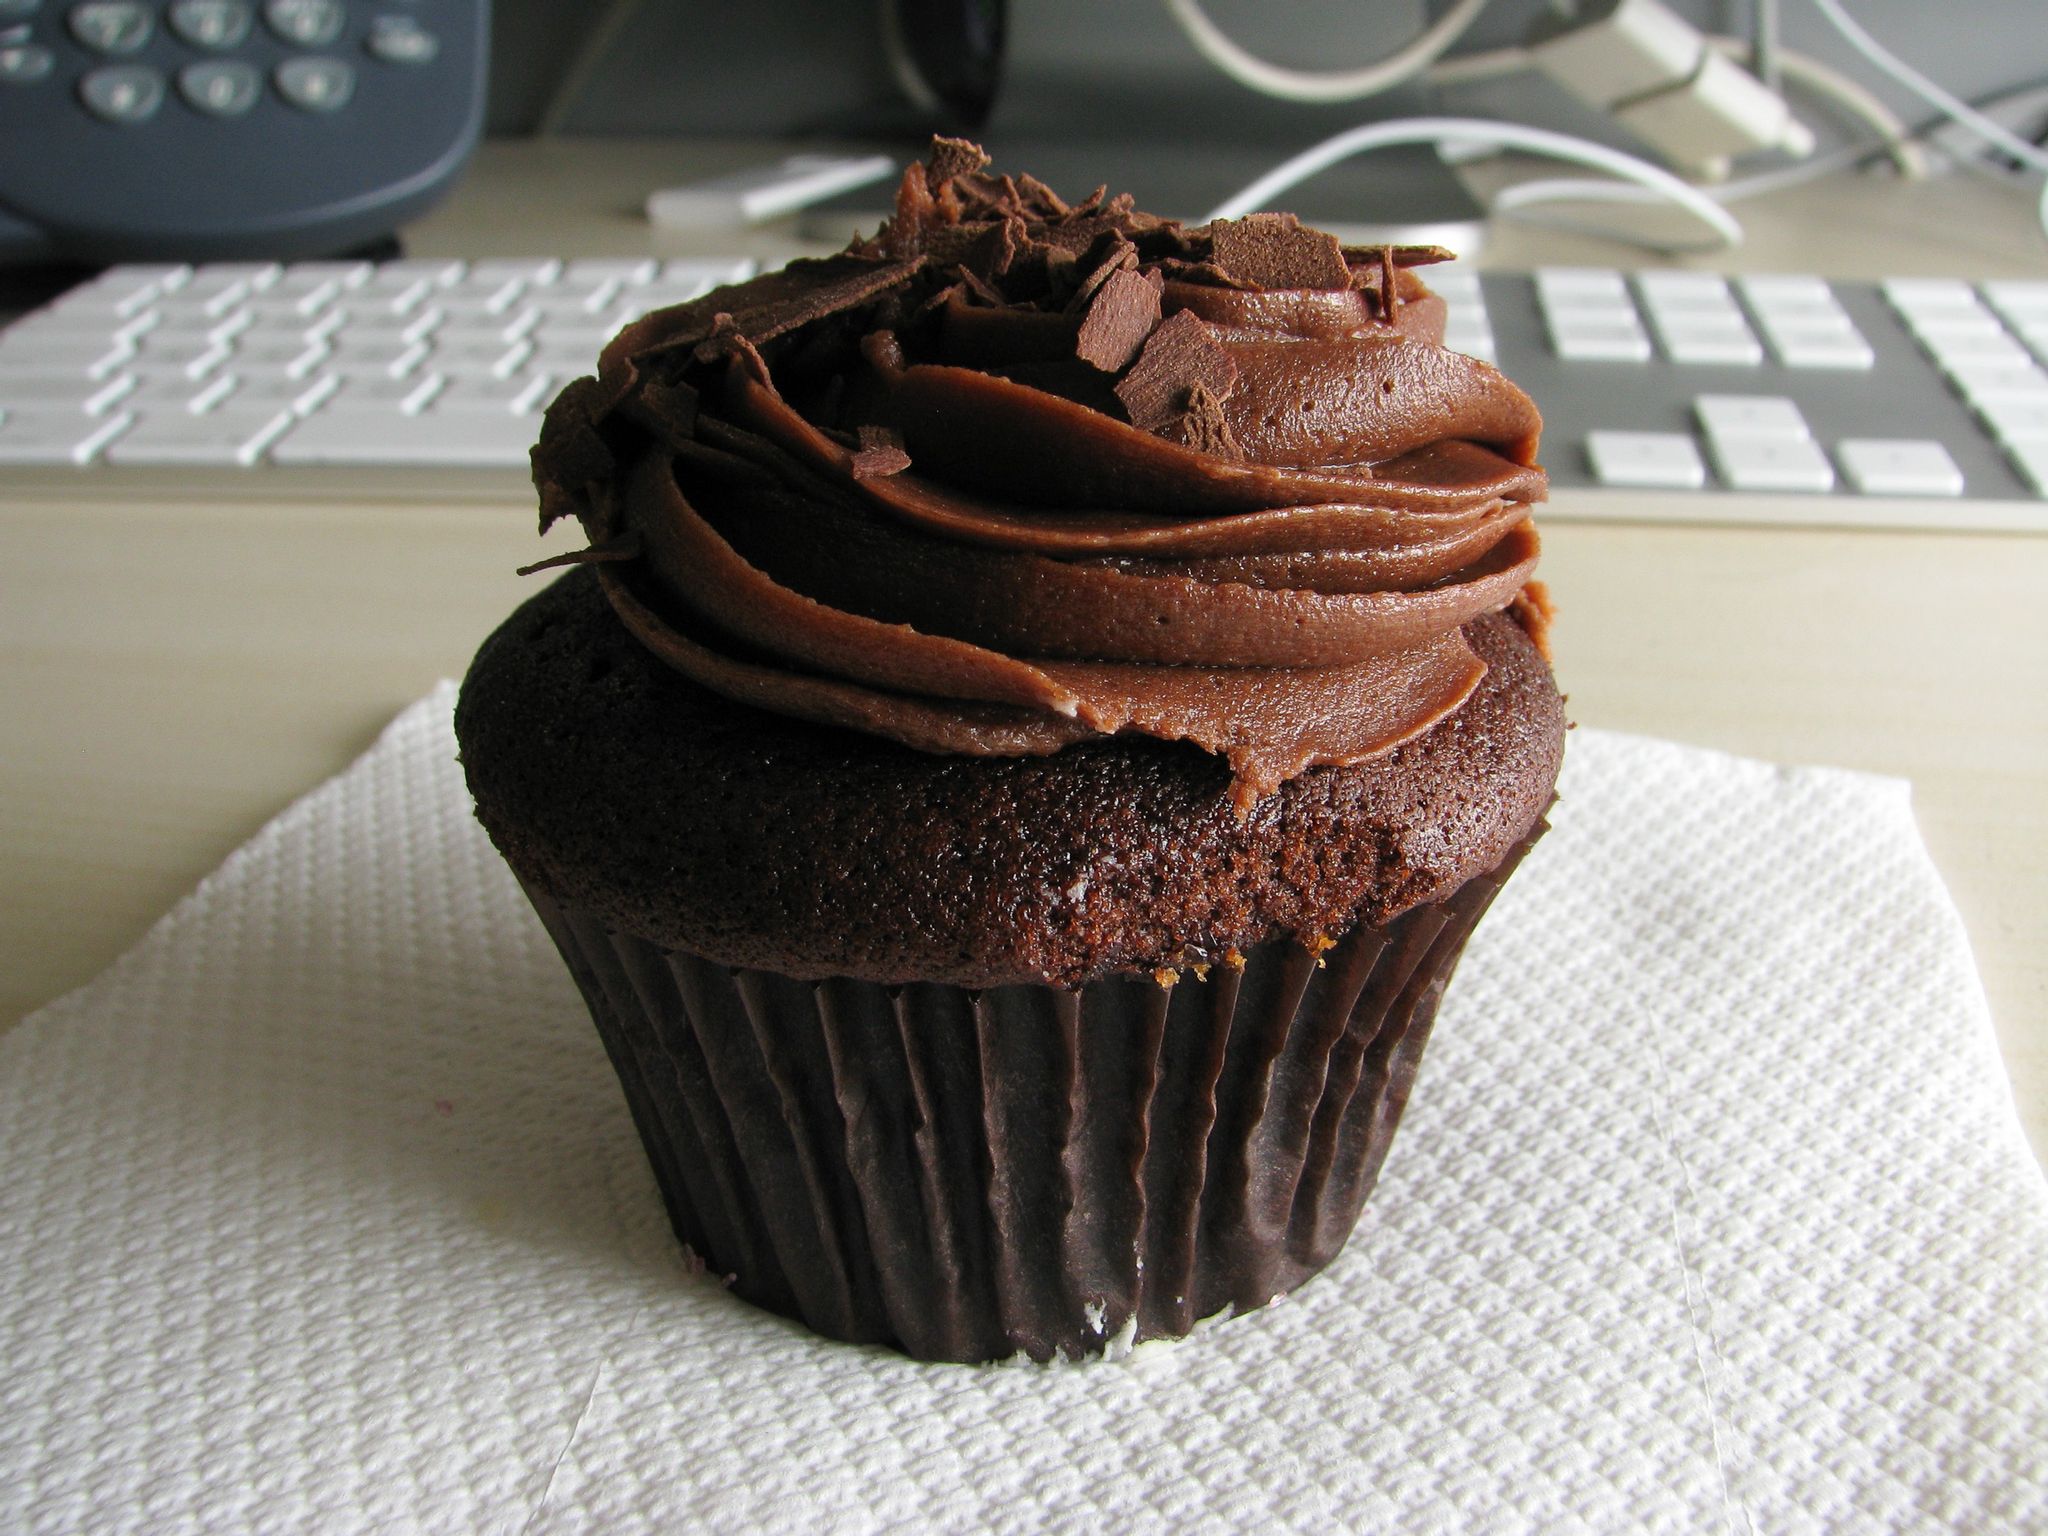 A close-up photo of a chocolate cupcake with a swirl of chocolate icing on the top.